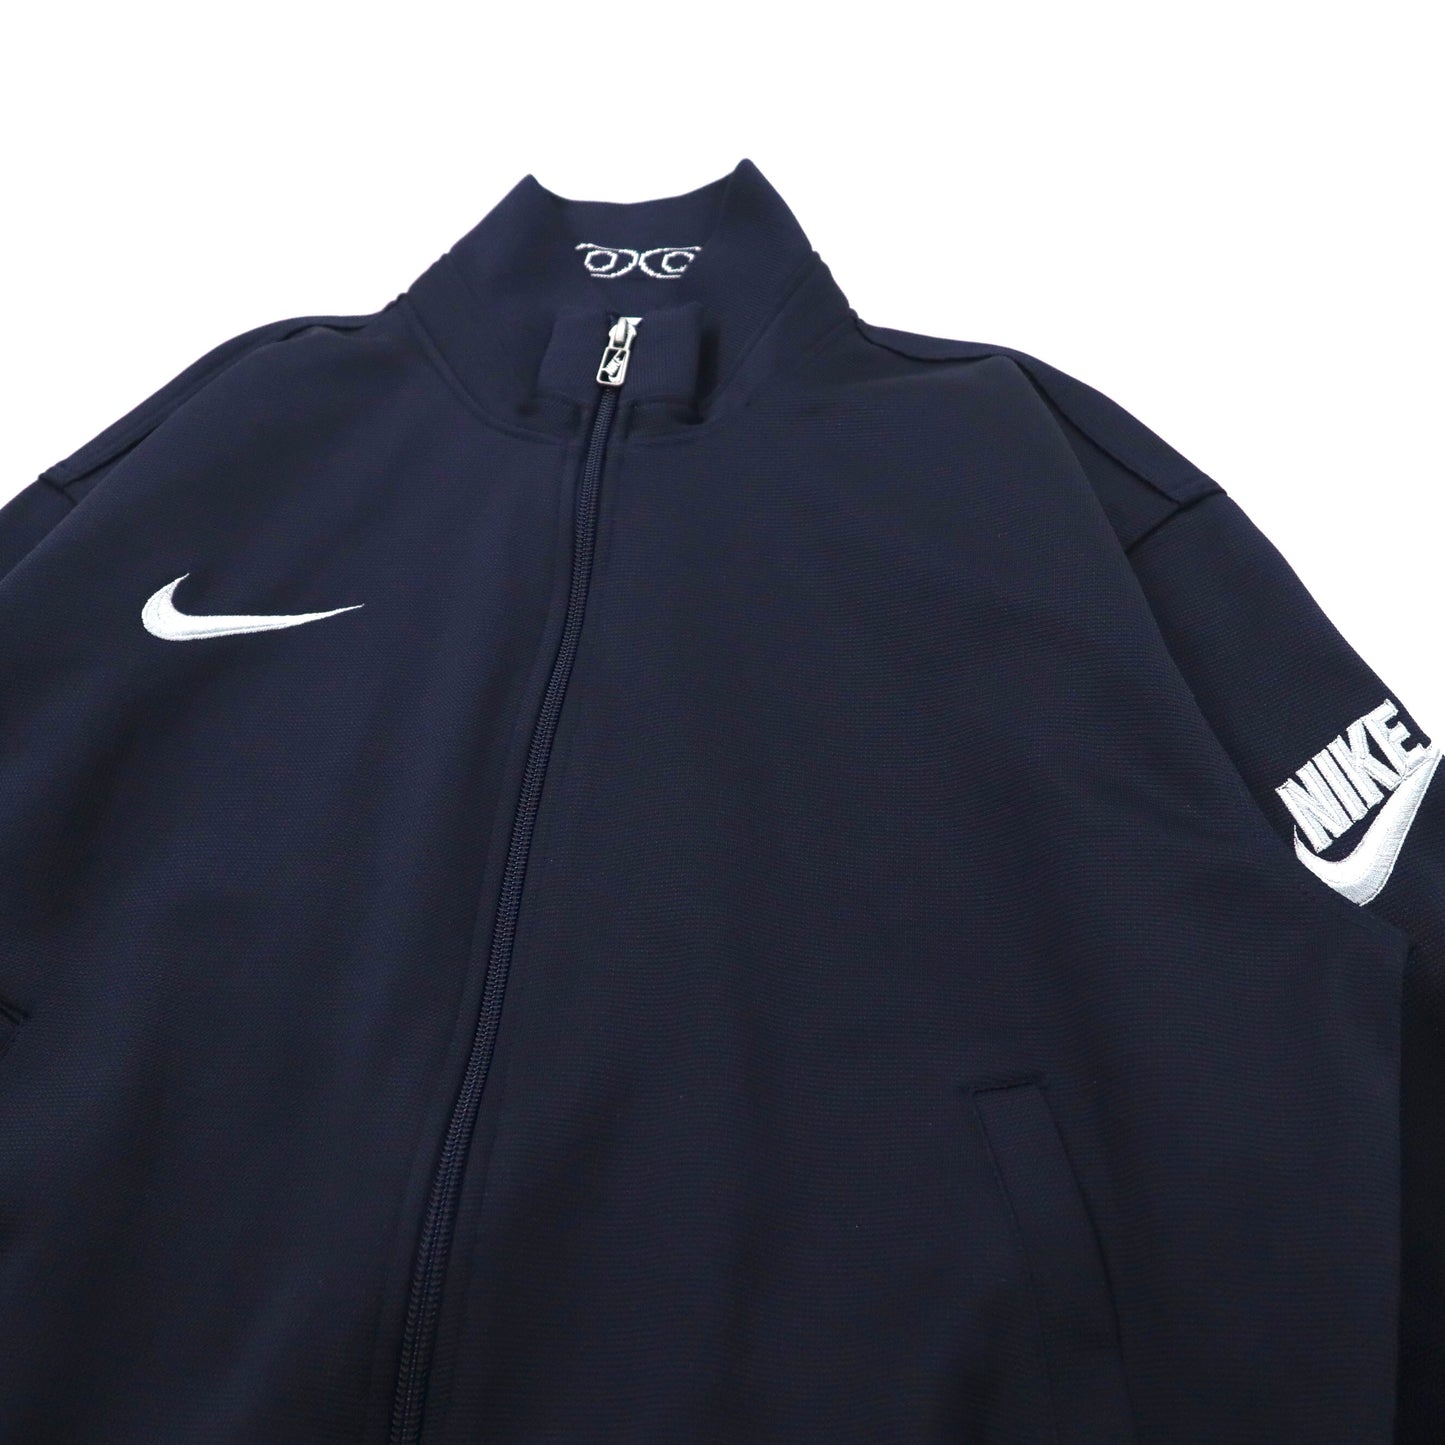 NIKE TRACK JACKET Jersey M Navy Polyester Swash Logo Embroidery Silver Tag  90s Japan MADE